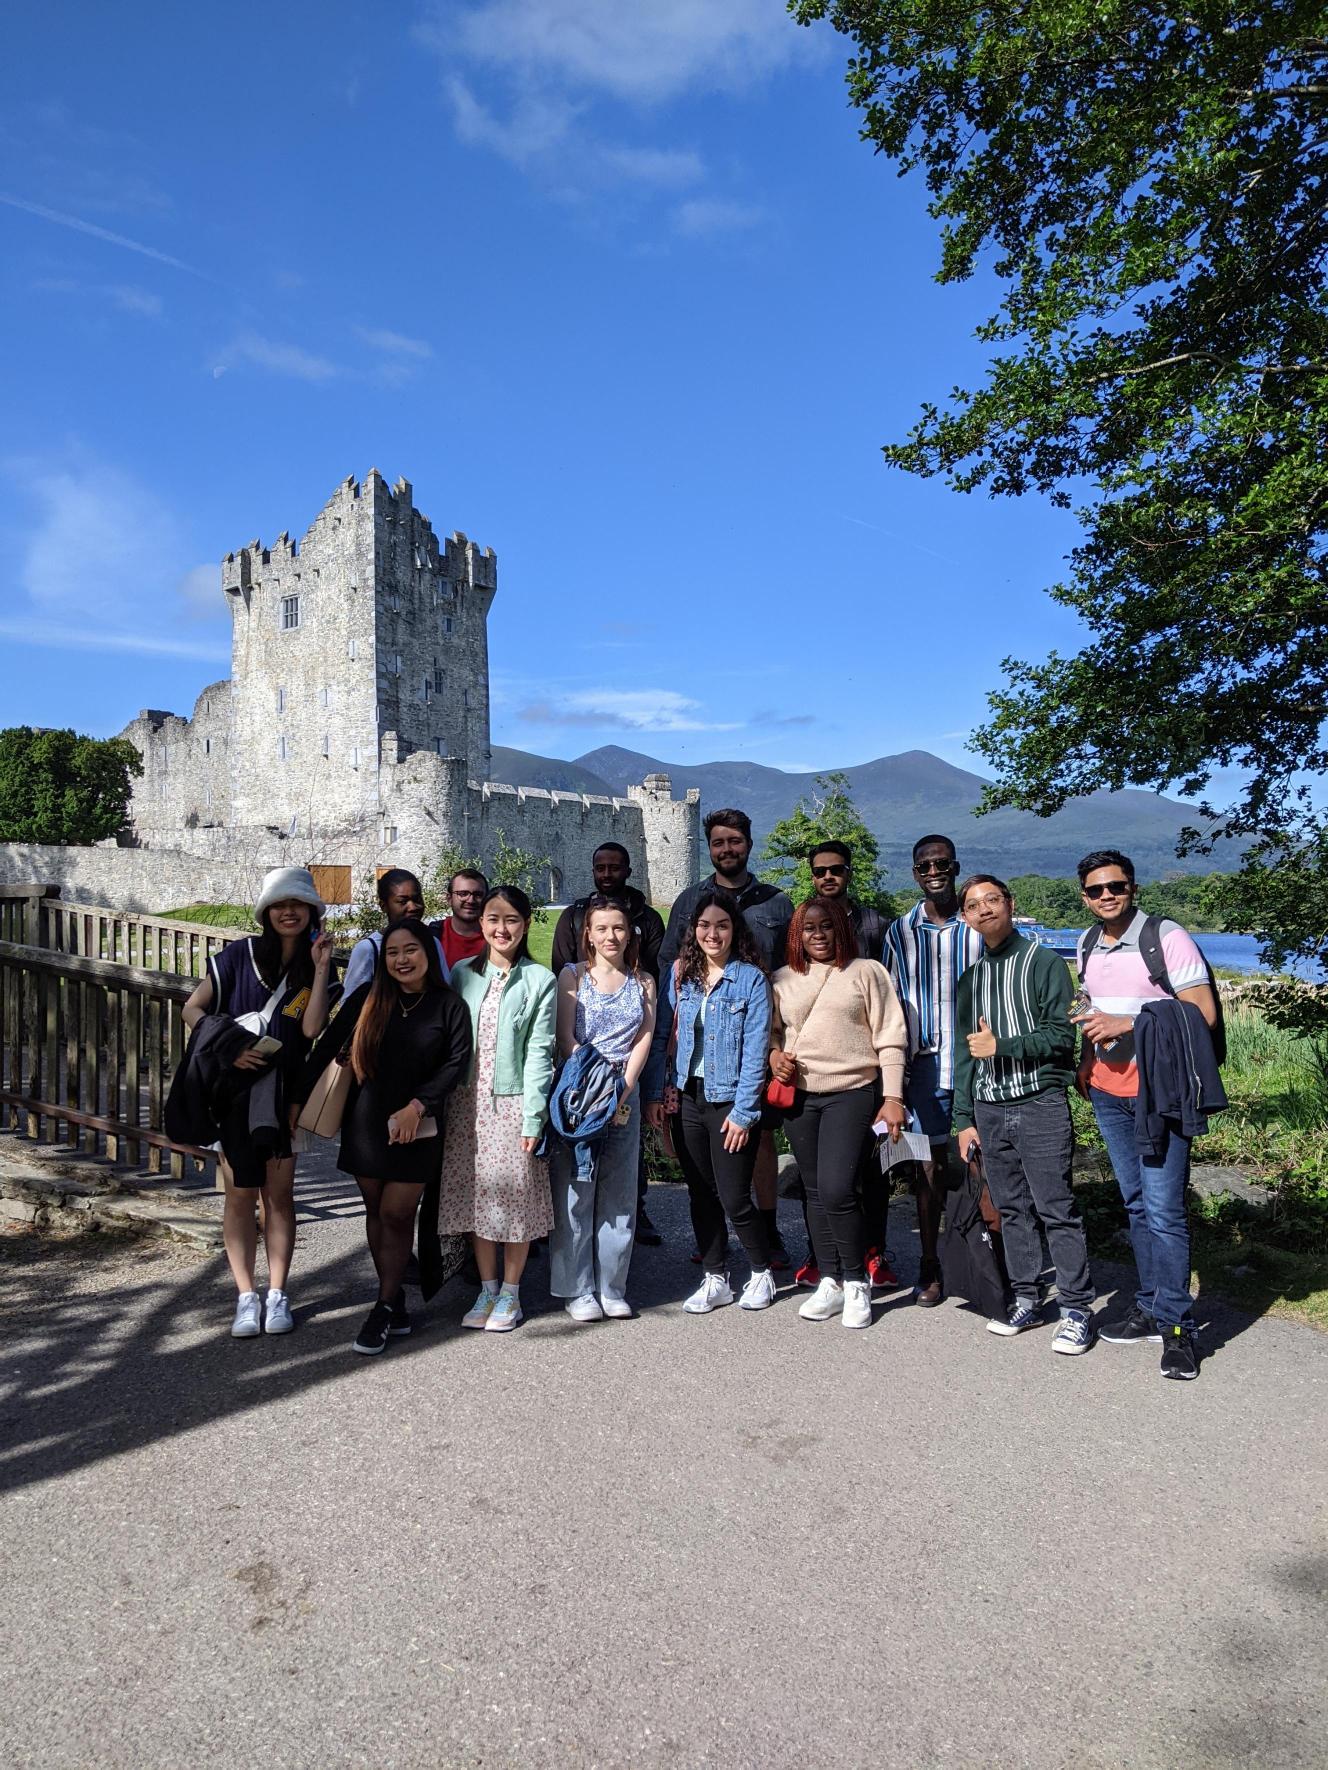 Students standing together outside of Ross castle in Killarney, Ireland